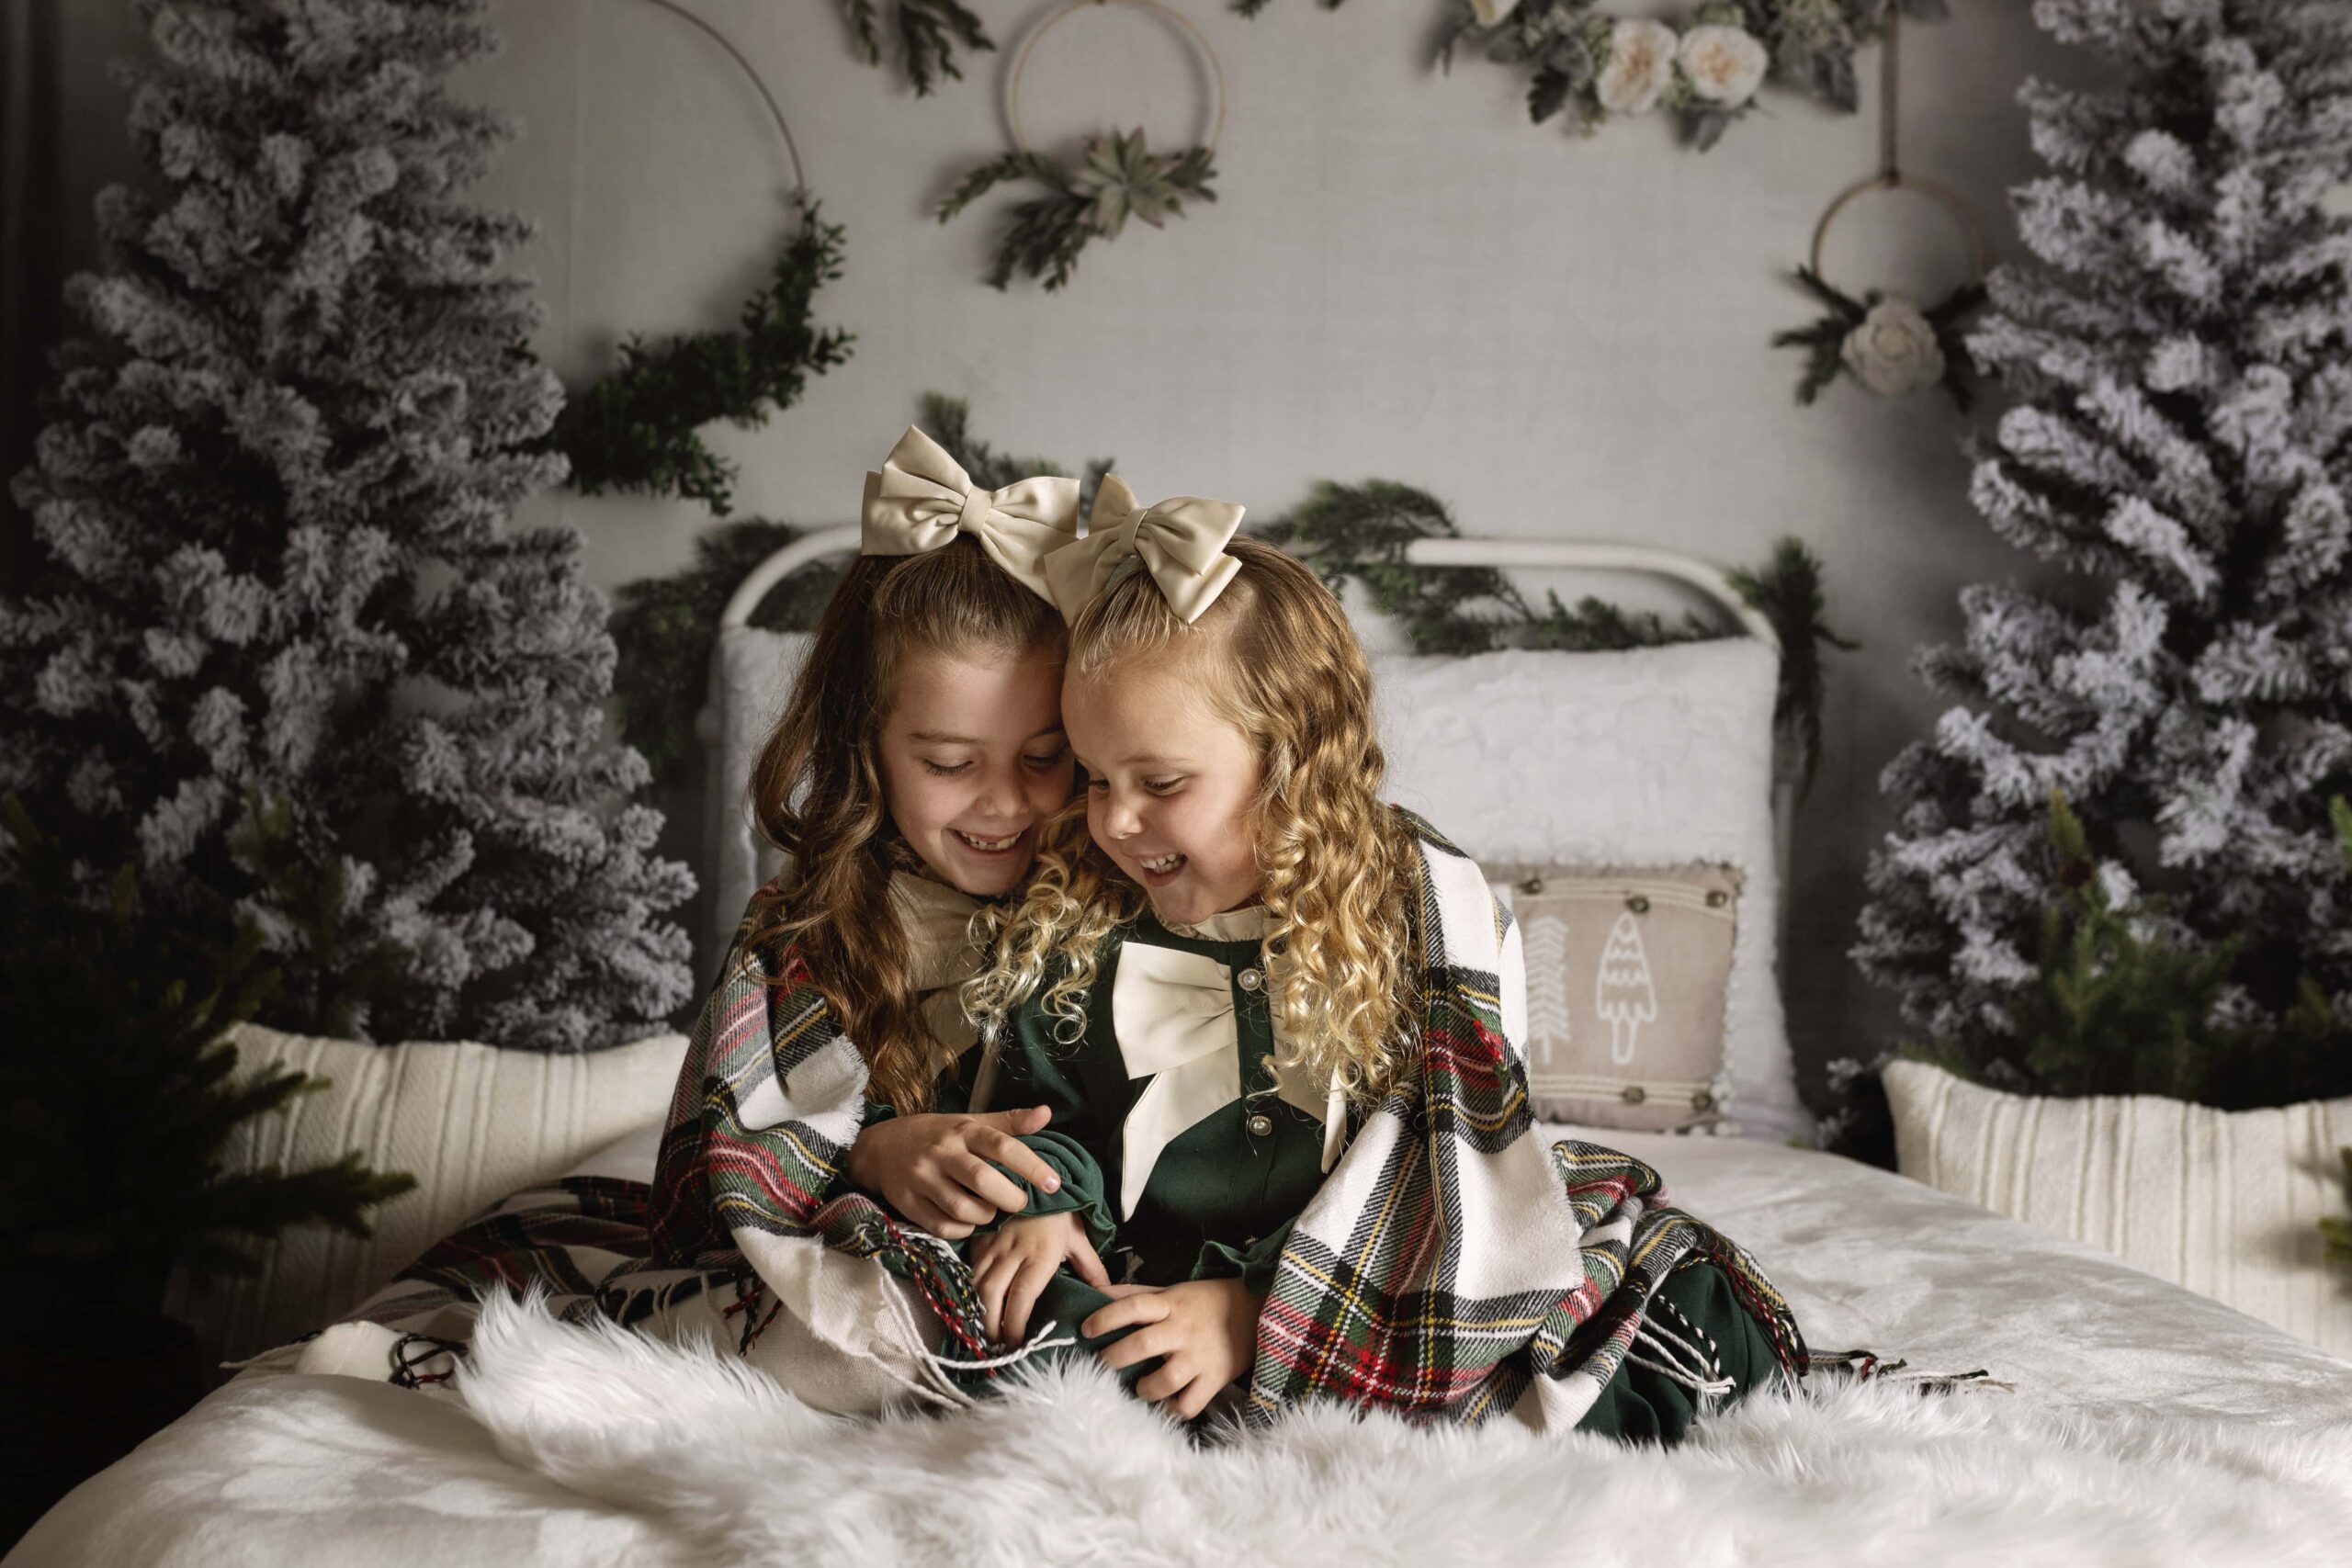 two girls laughing together on a bed in a Christmas themed set